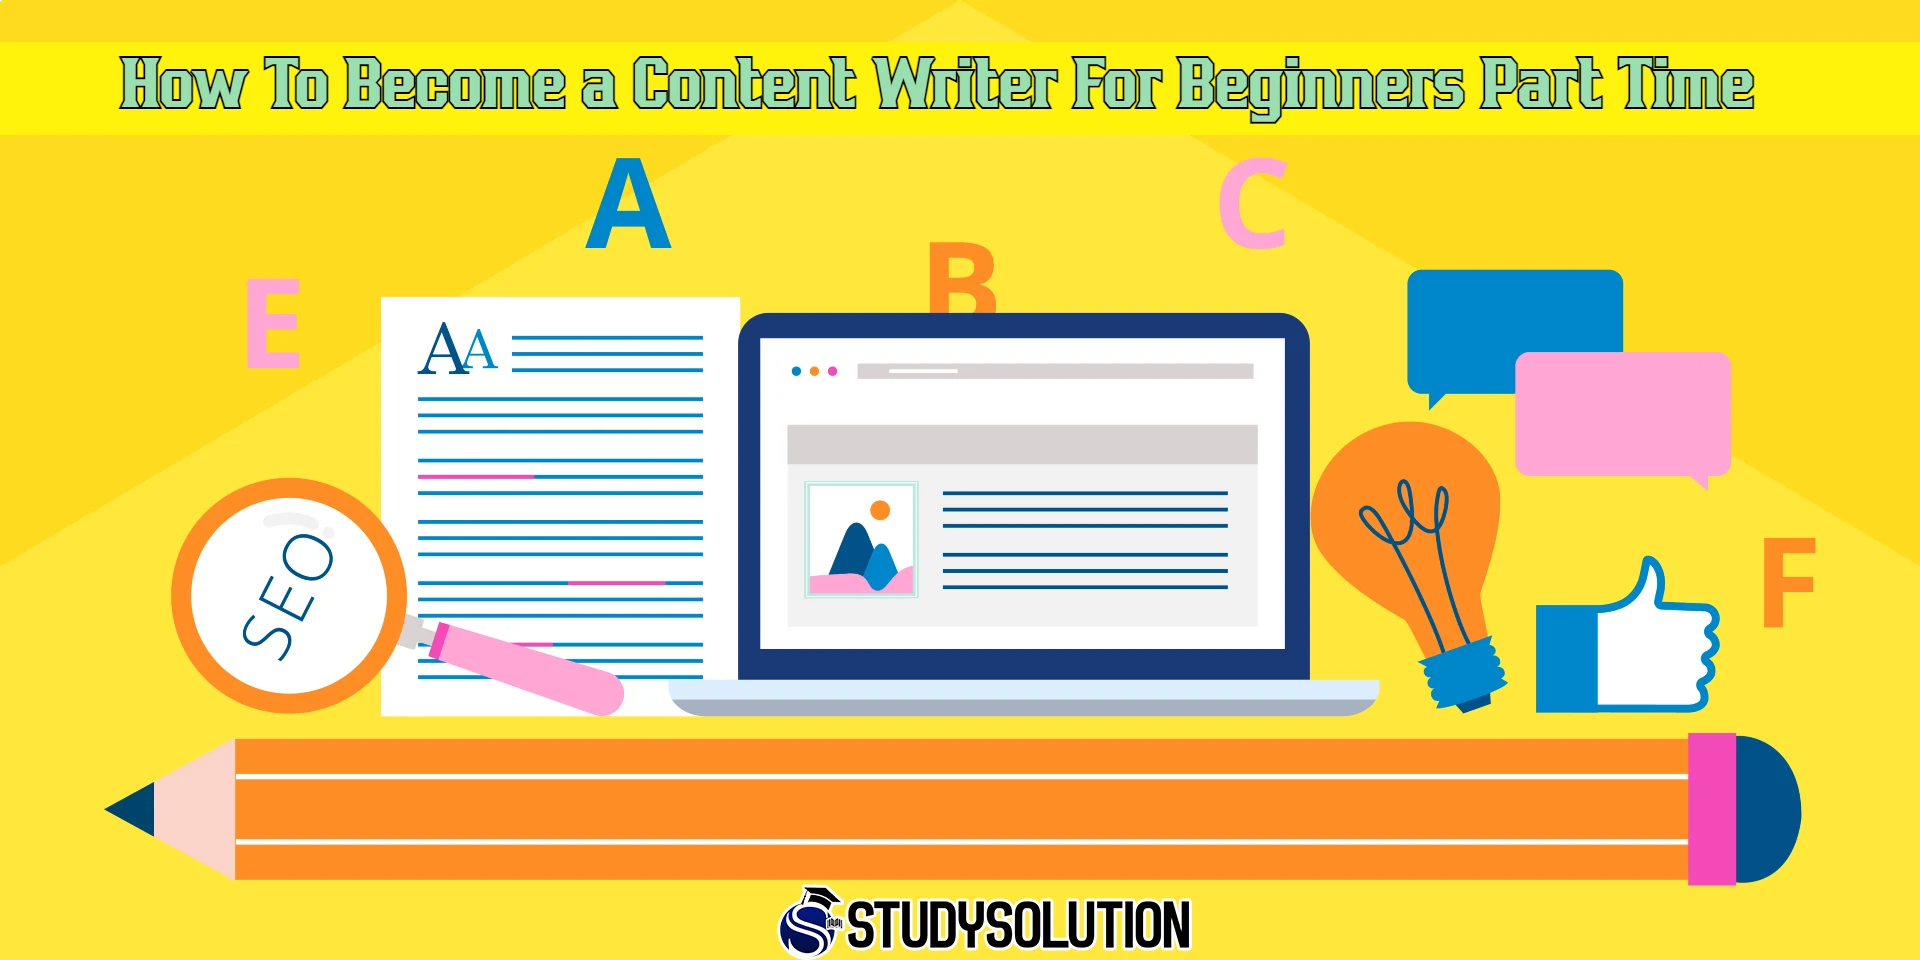 How To Become a Content Writer For Beginners Part Time